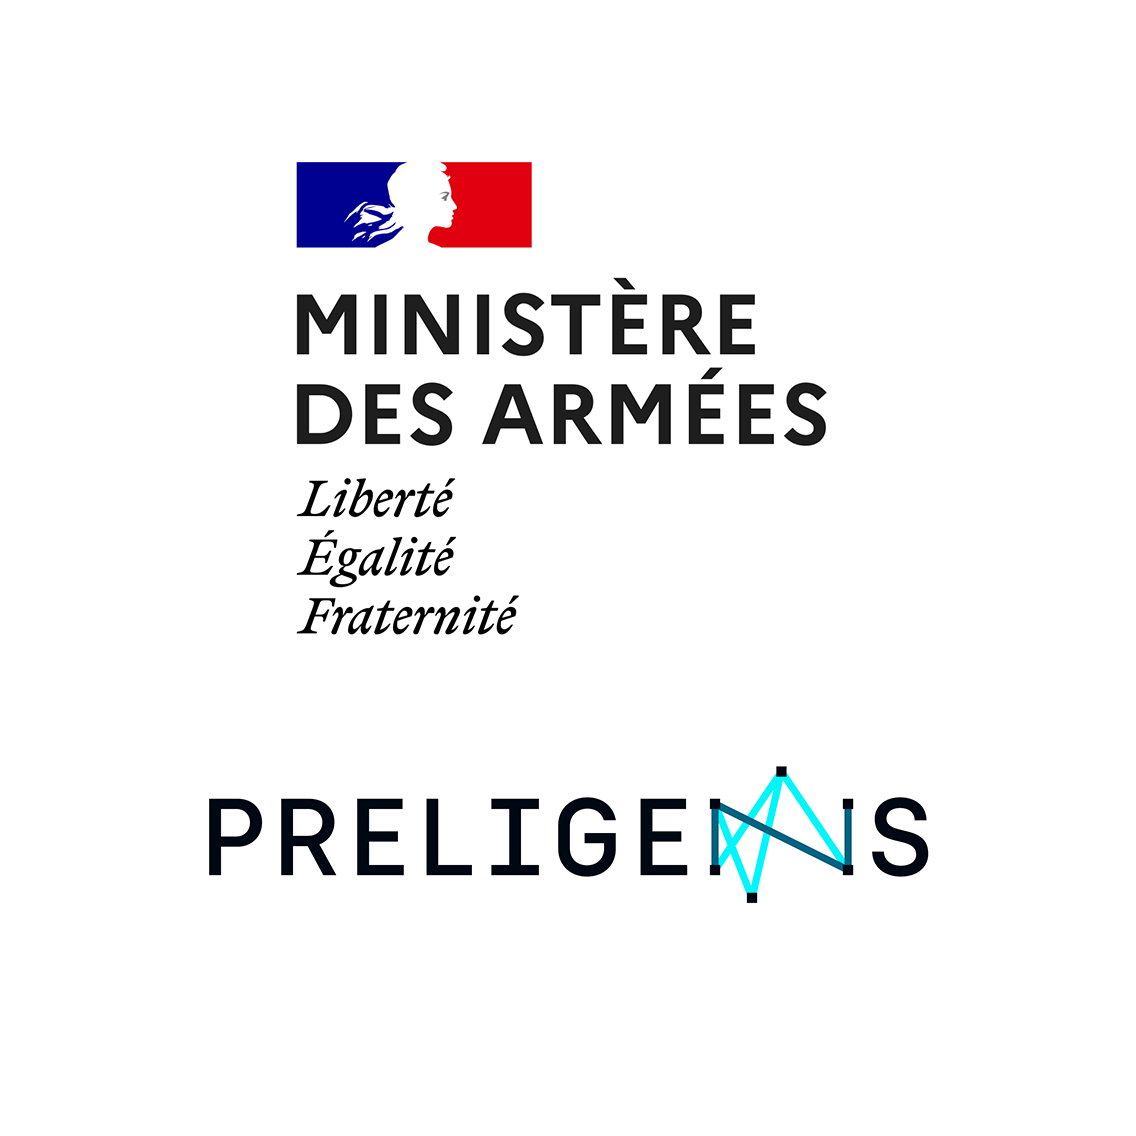 Press Release: The French Ministry of Armed Forces renews its confidence in the technologies developed by Preligens